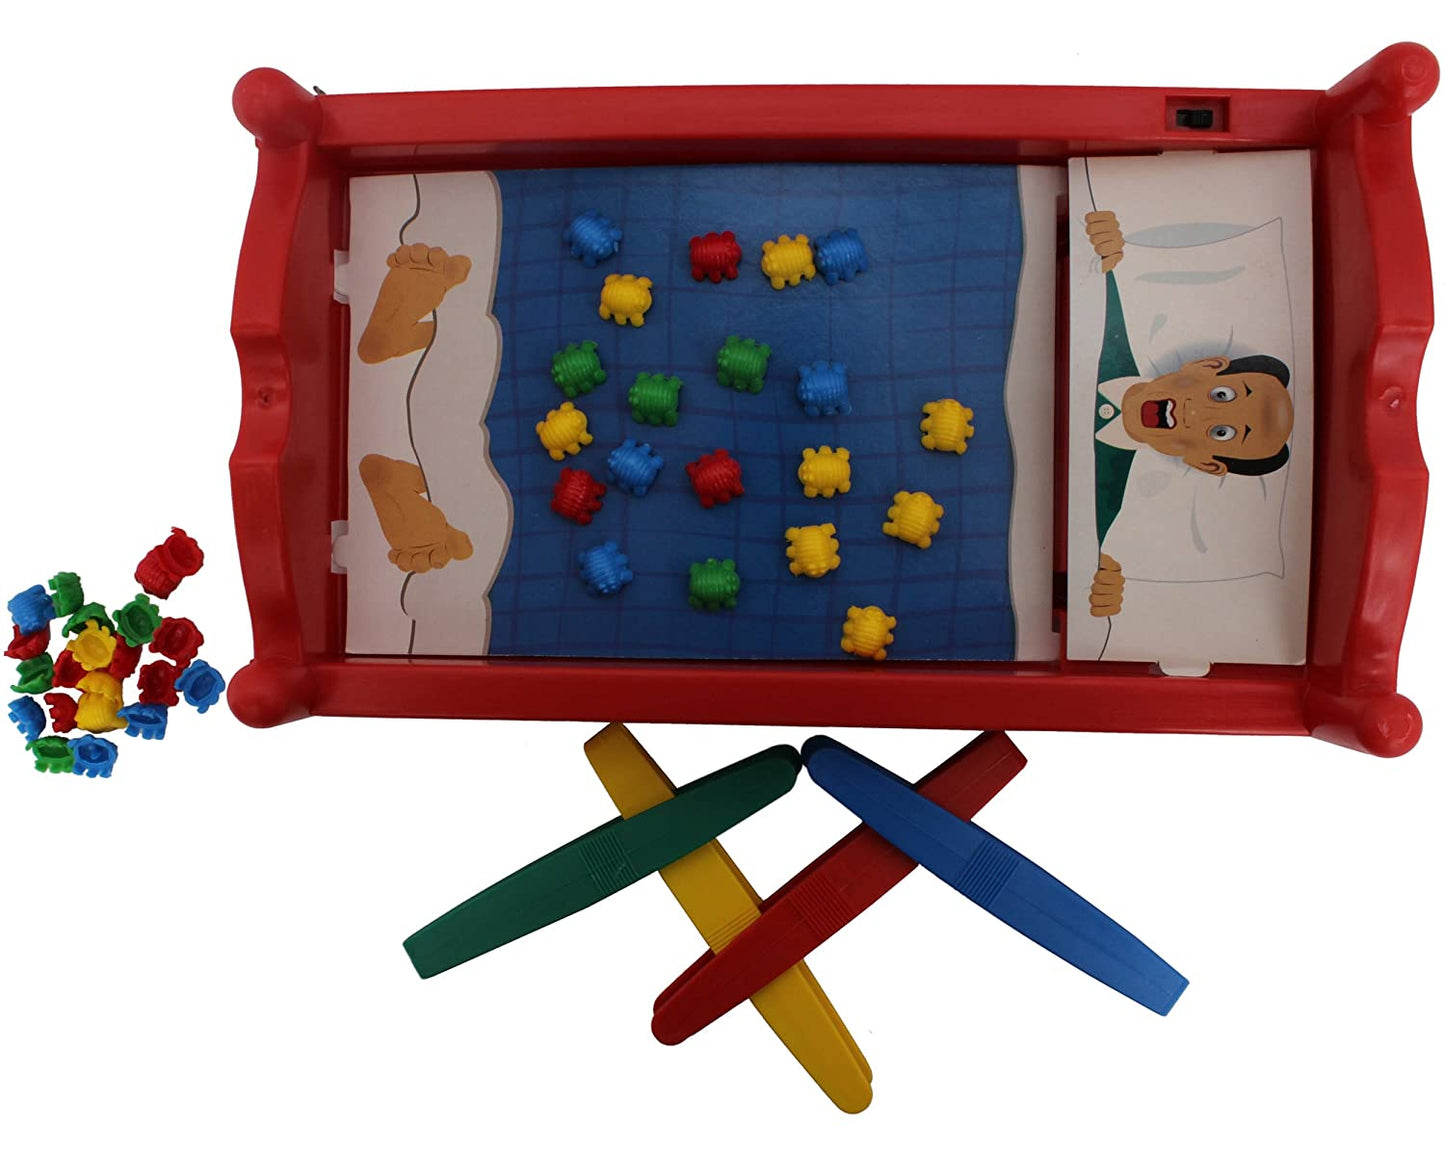 Funskool Bed Bugs Board Game - Multi-Color for Kids 6+ Years